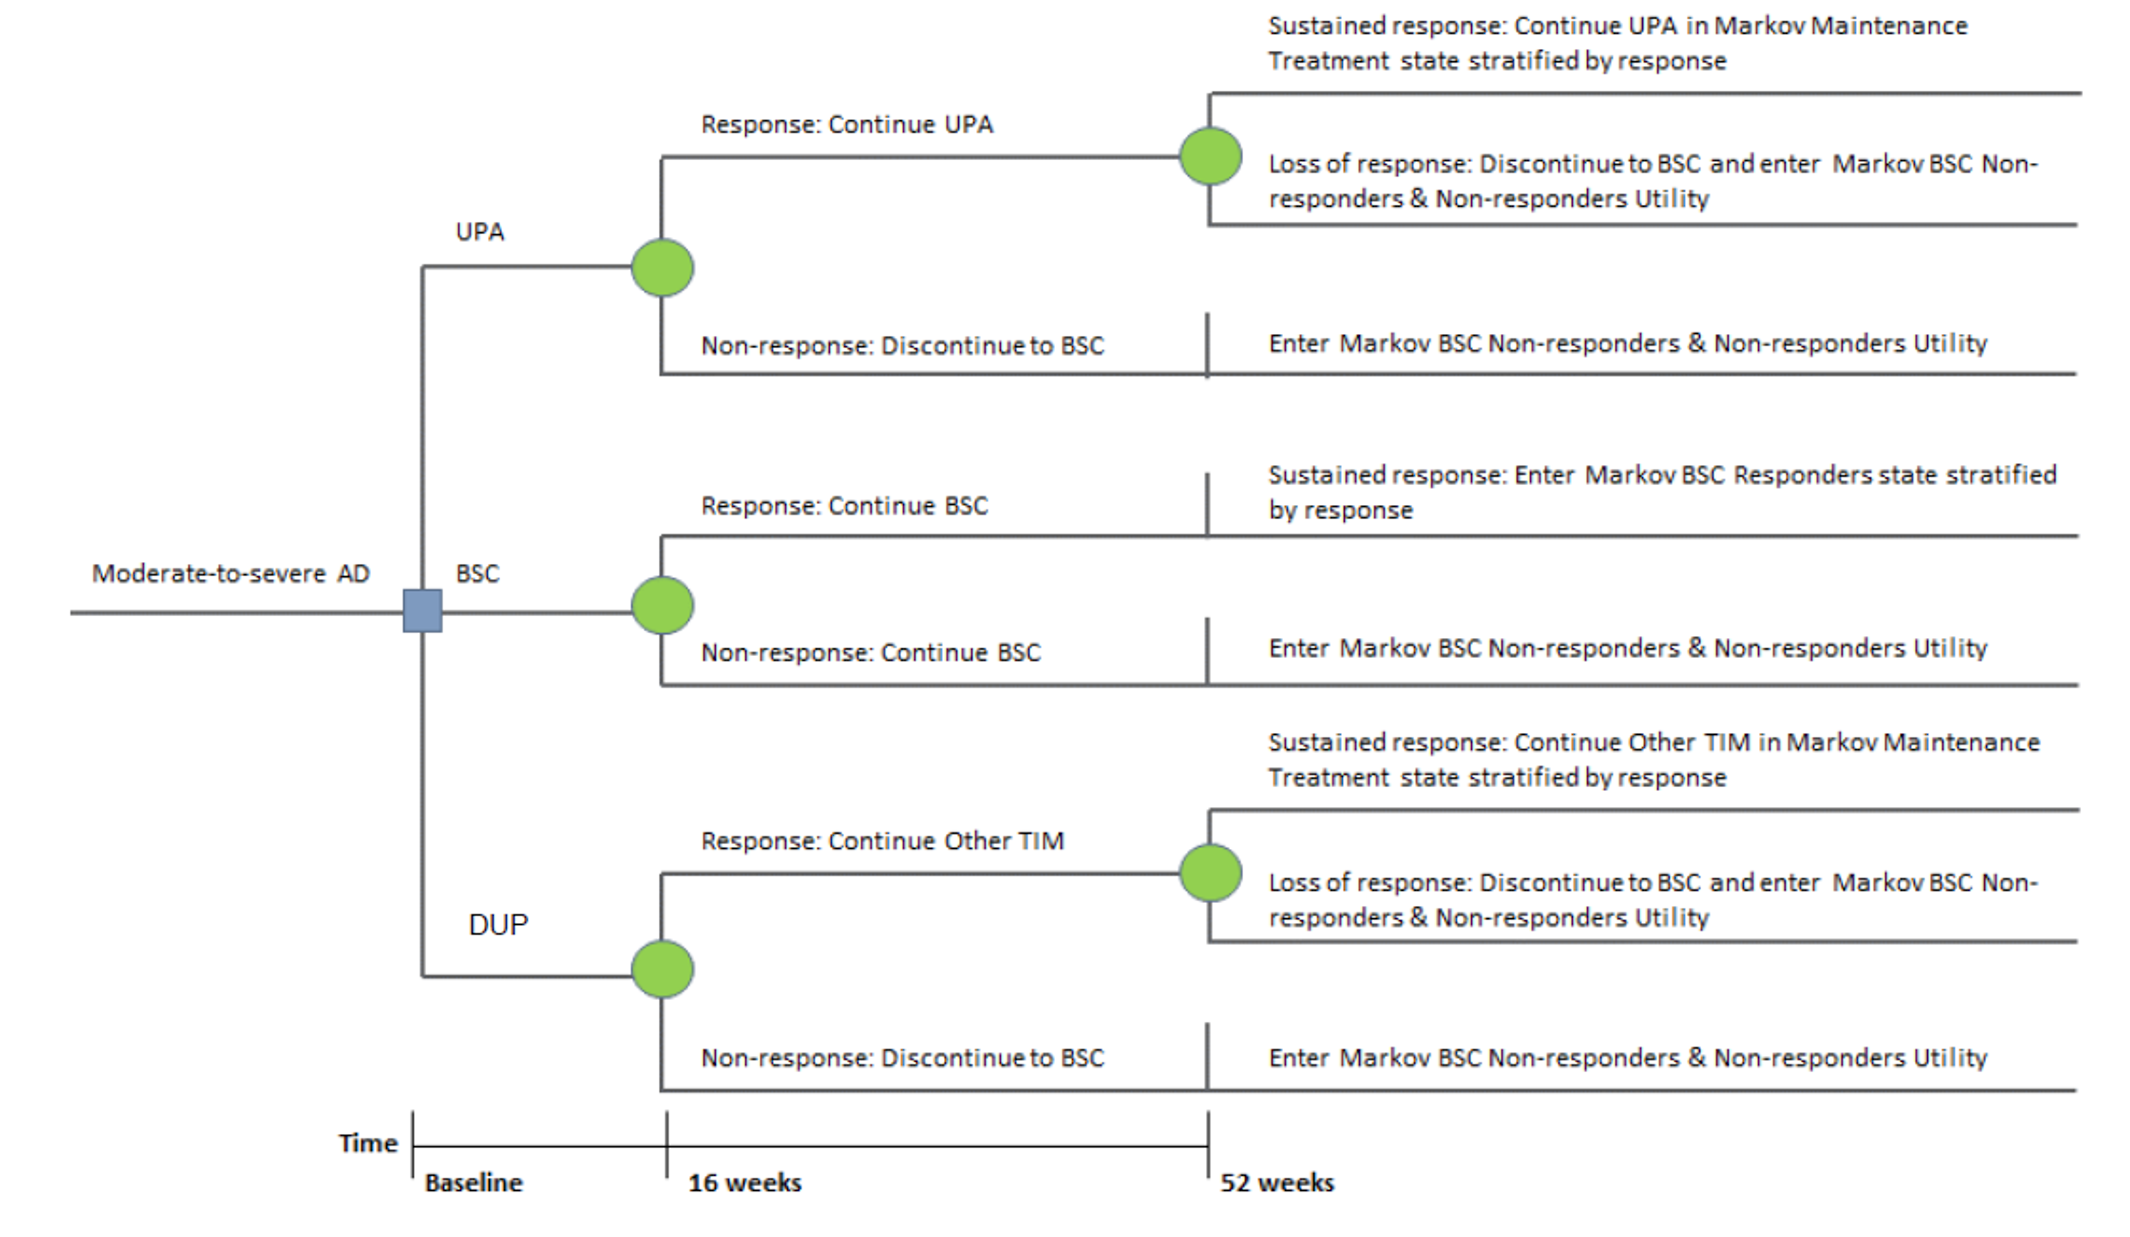 A decision tree describing branching possibilities about patients with moderate to severe AD. They may be treated with UPA, BSC, or DUP. They may experience response or non-response to these treatments; non-response is managed with BSC. If response is sustained, they move to the Markov model in the Maintenance state (if UPA or DUP), or the BSC Responders state (if BSC). If they have a loss of response, they move to the Non-responders state.